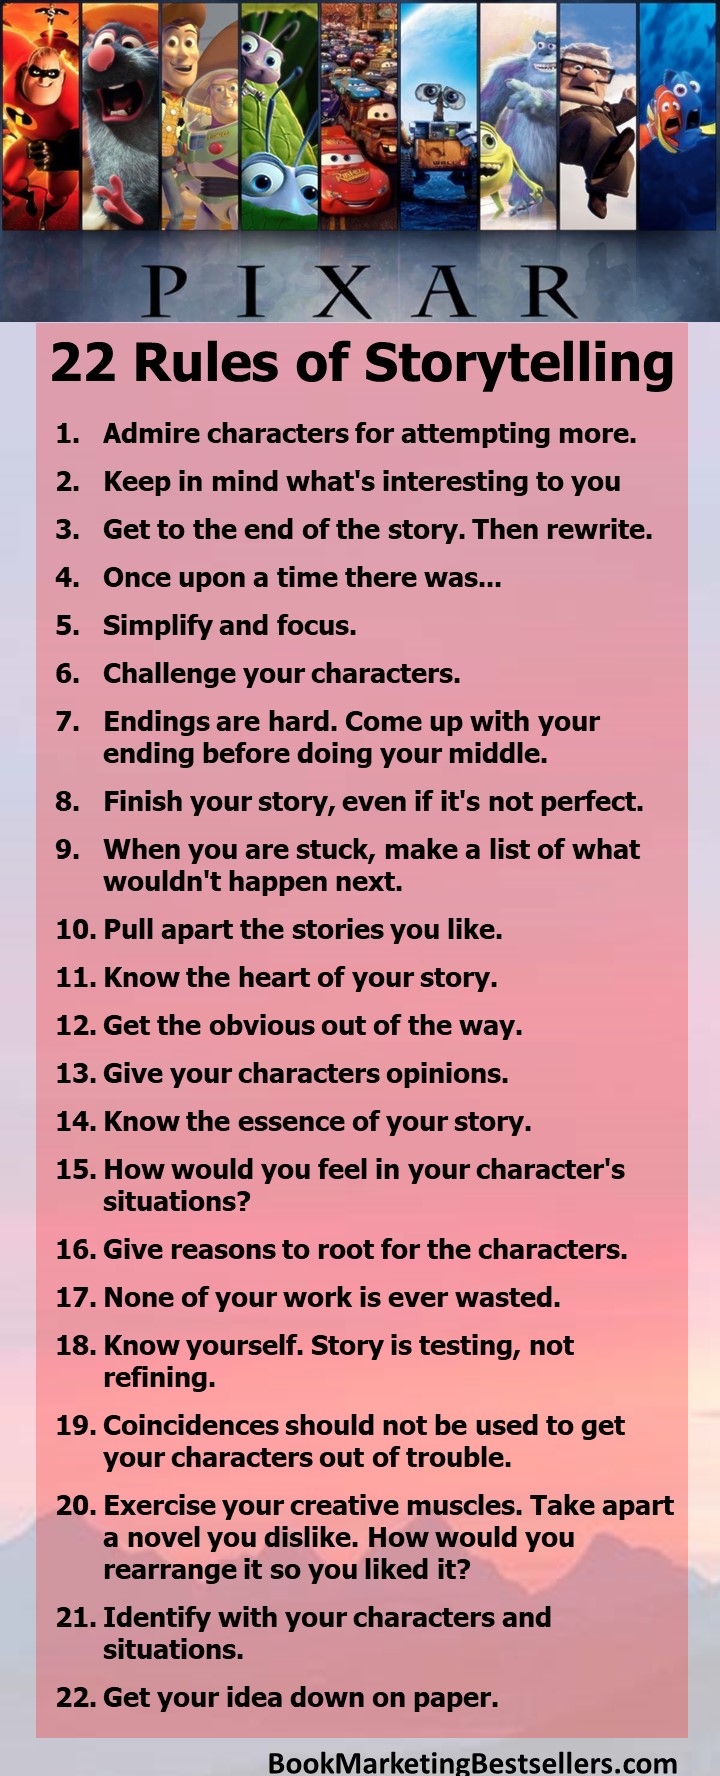 Pixar's 22 Rules for Storytelling: Challenge Your Characters. Come Up With Your Ending Before Doing Your Middle. #writing #writers #authors